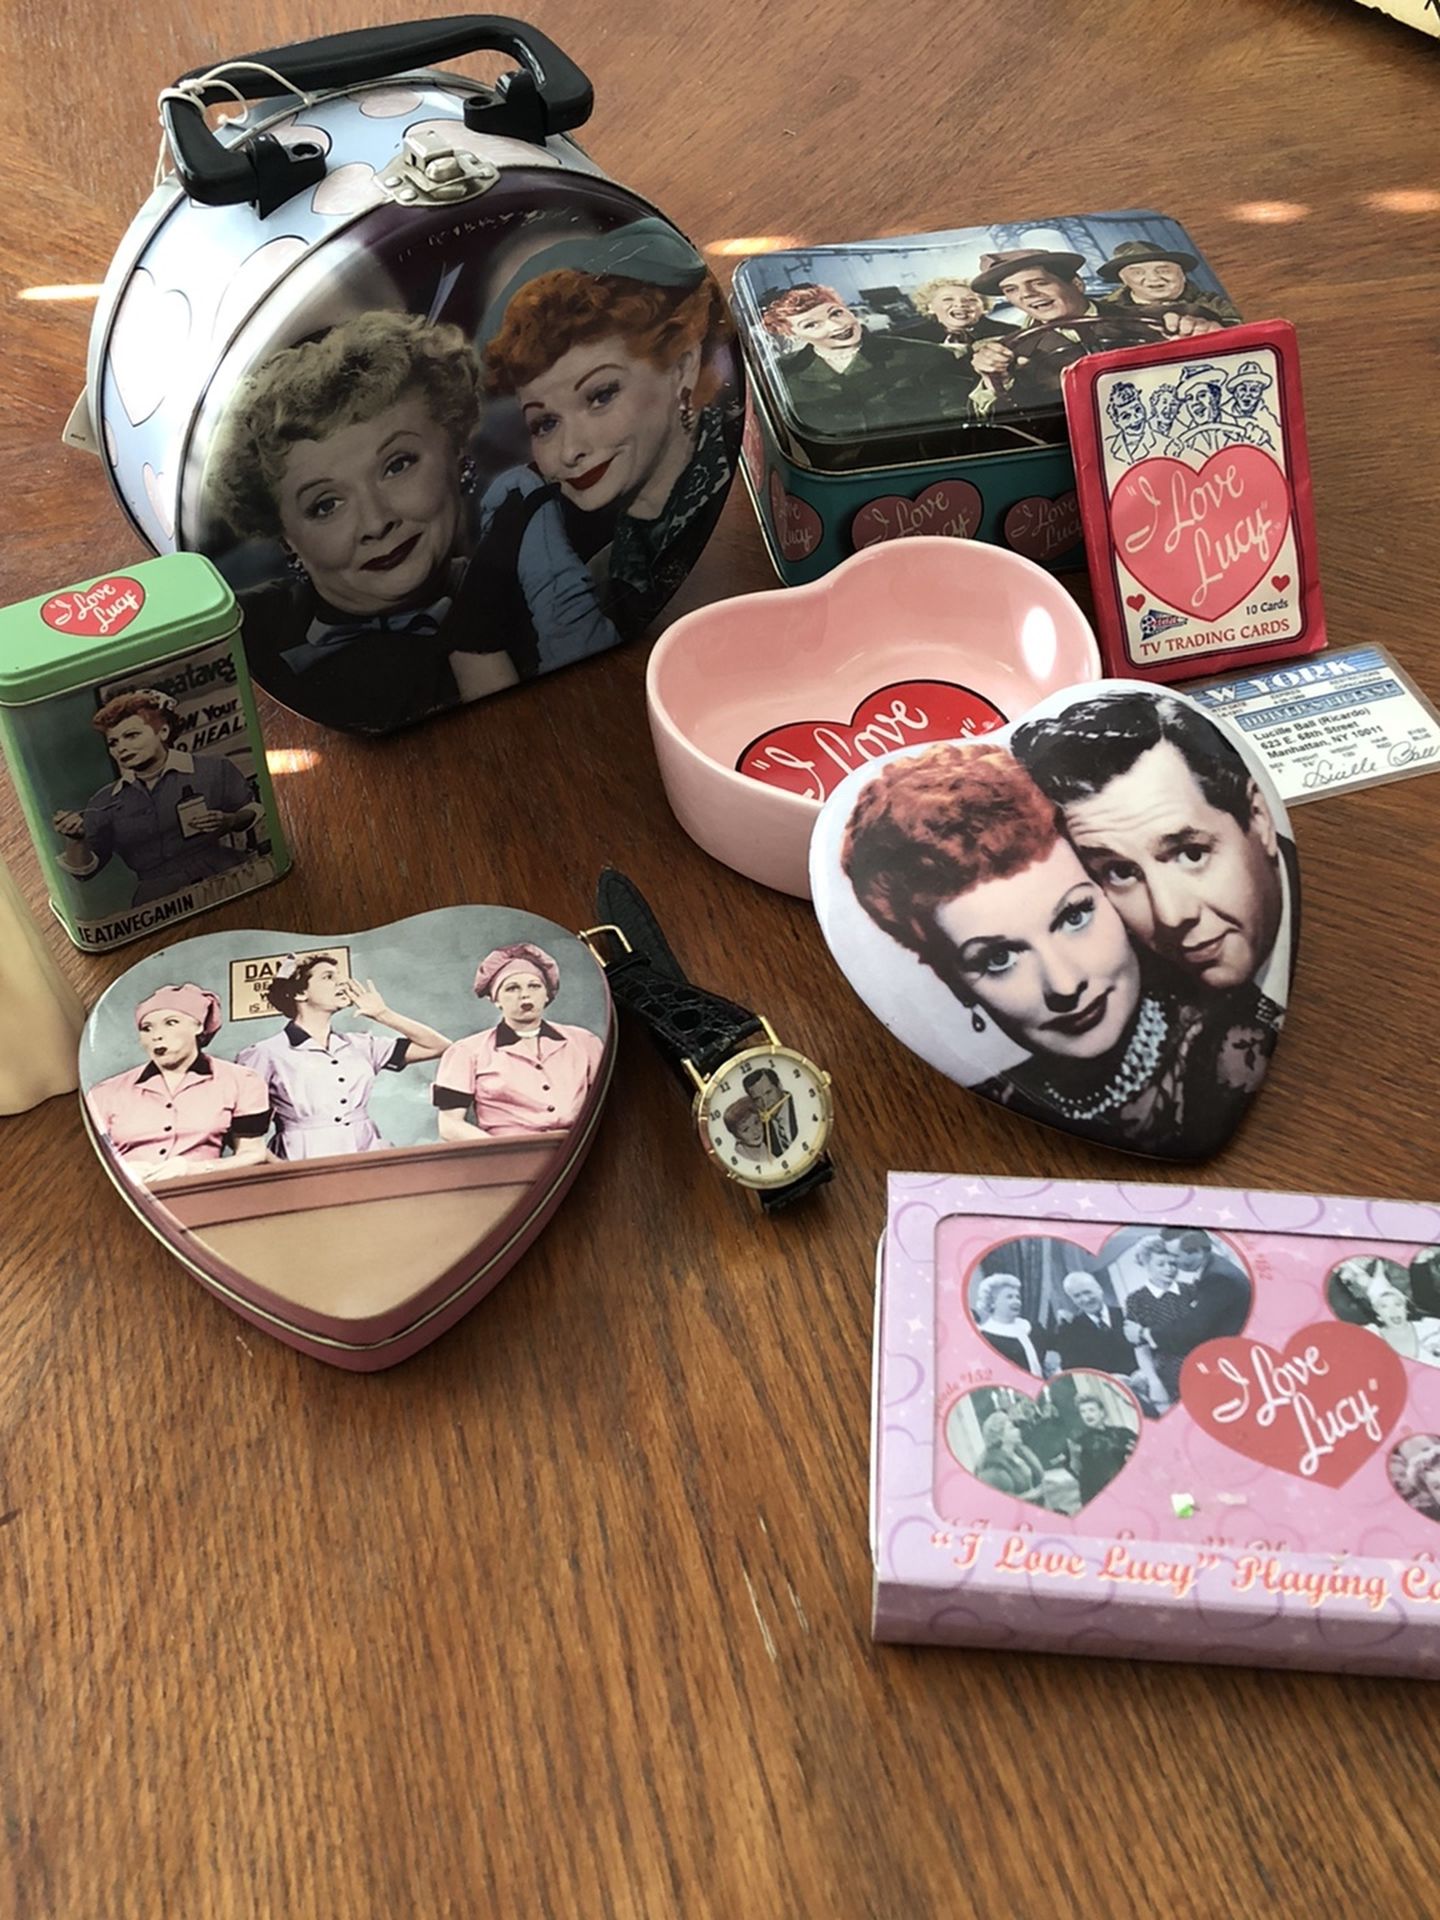 I love Lucy collectibles. Miscellaneous items